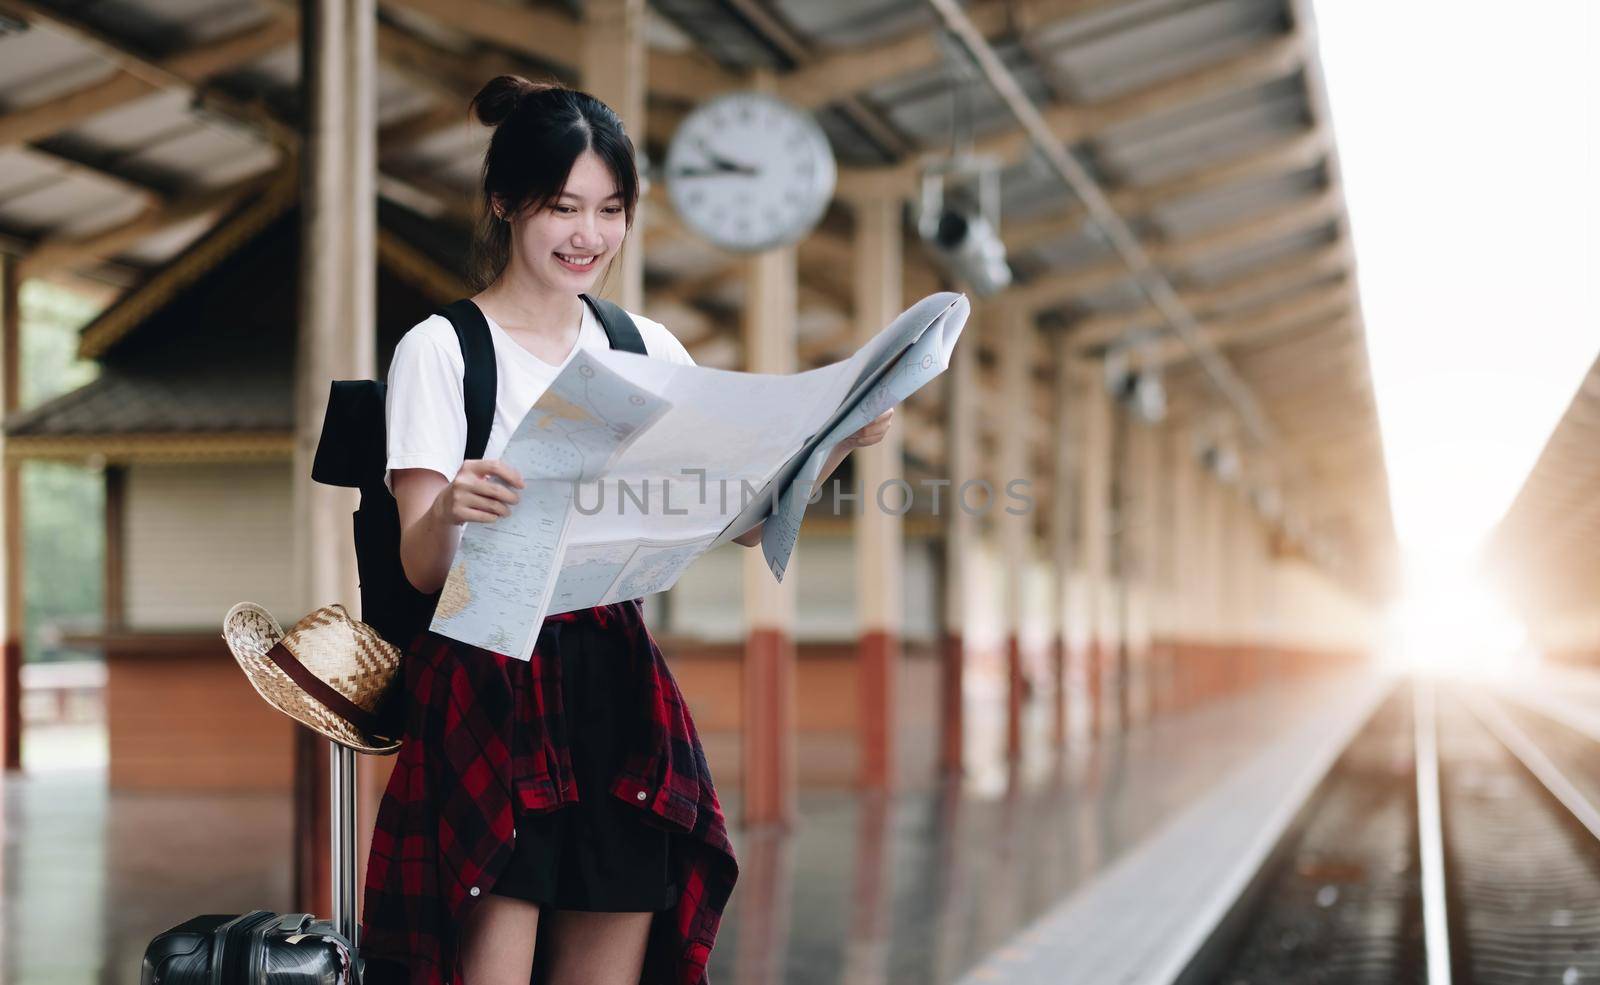 Young woman traveler with luggage and hat looking at map with train background at train station. travel concept